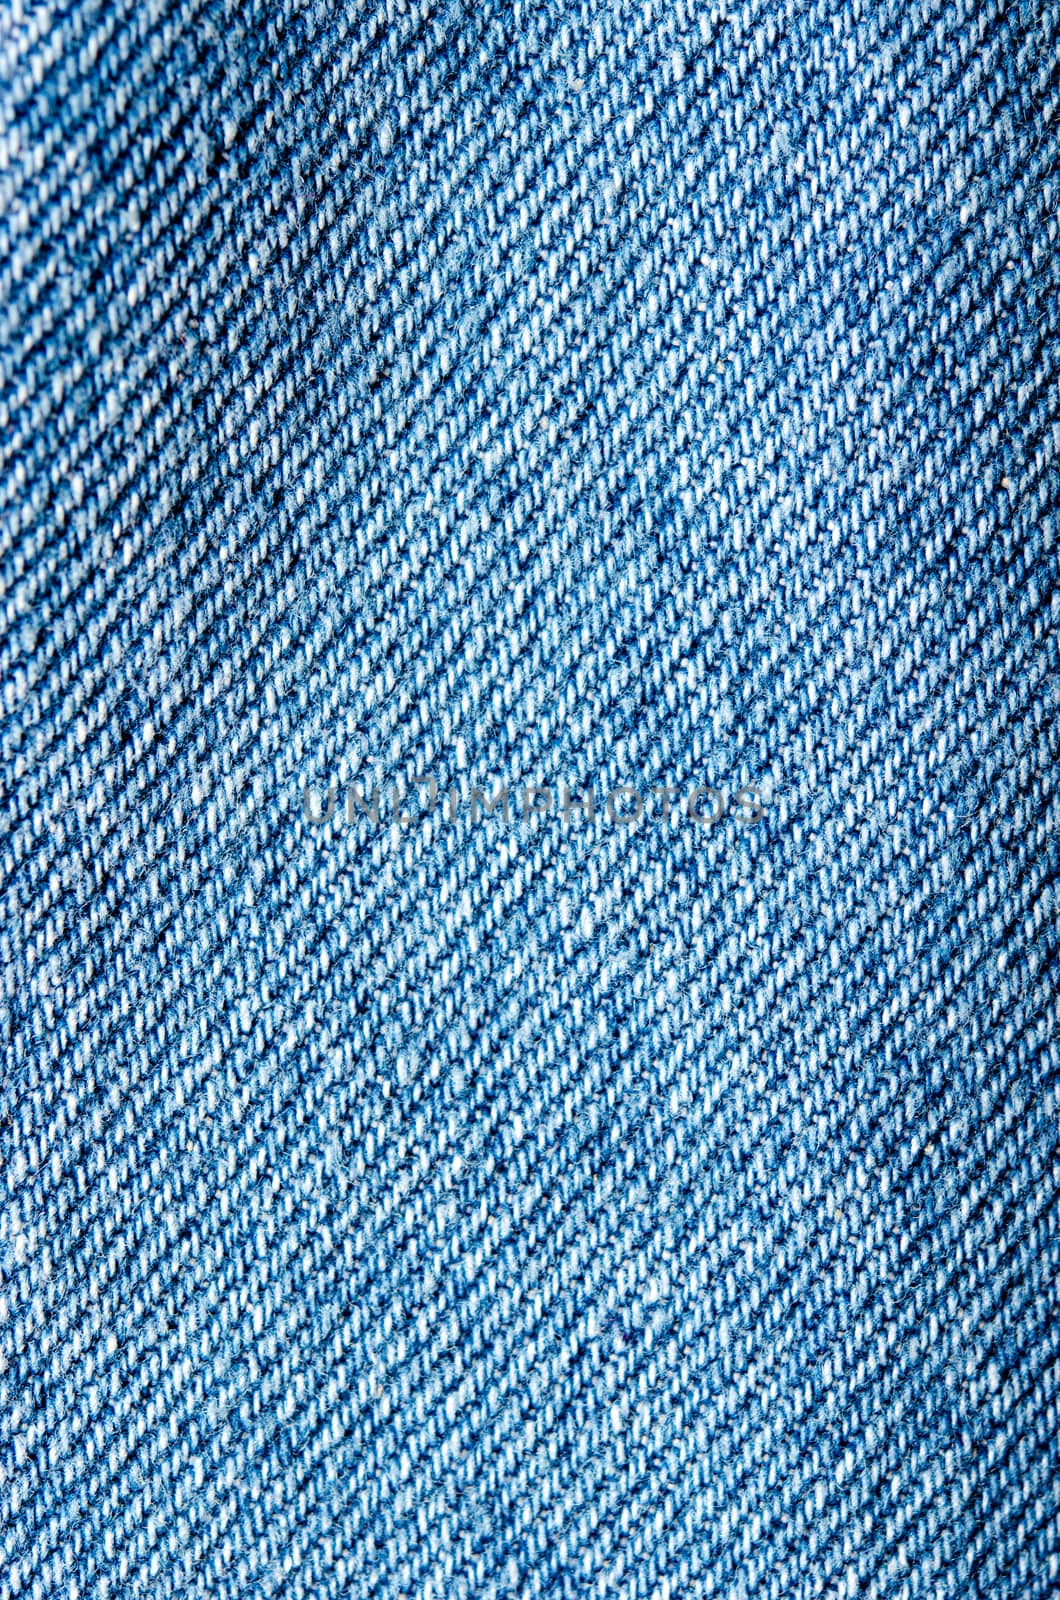 Close up shot of jeans  can see the texture